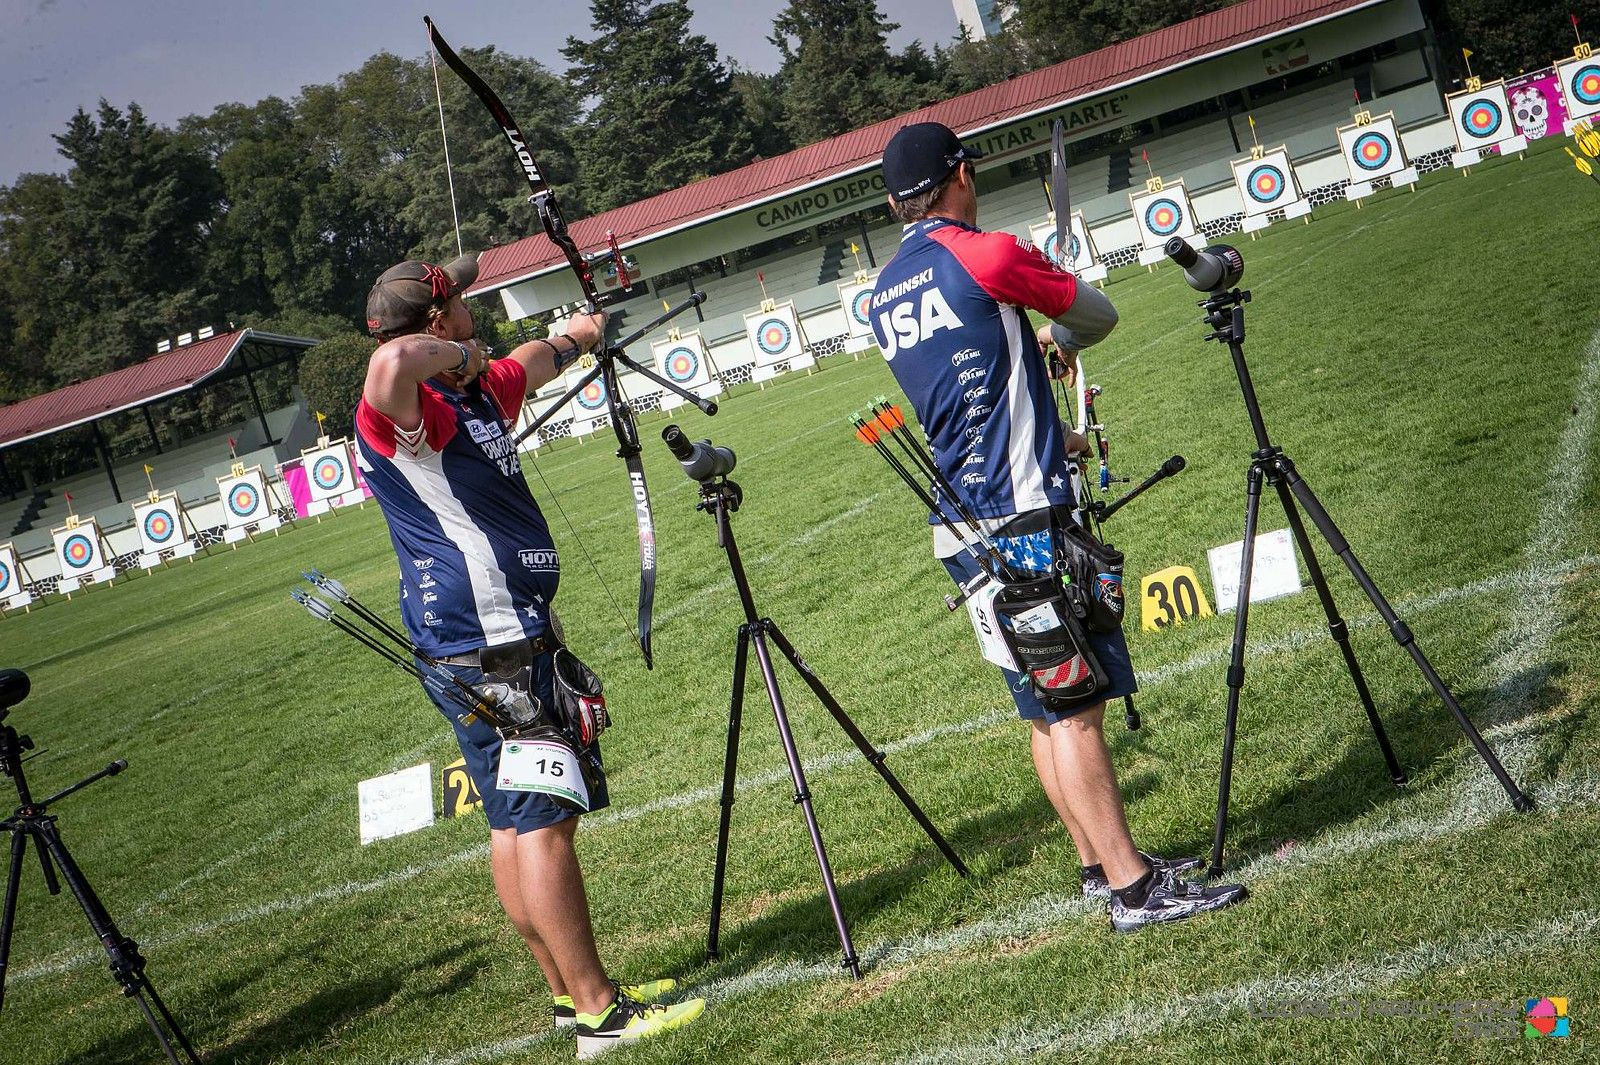 Rio 2016 bronze medallist crashes out of World Archery Championships